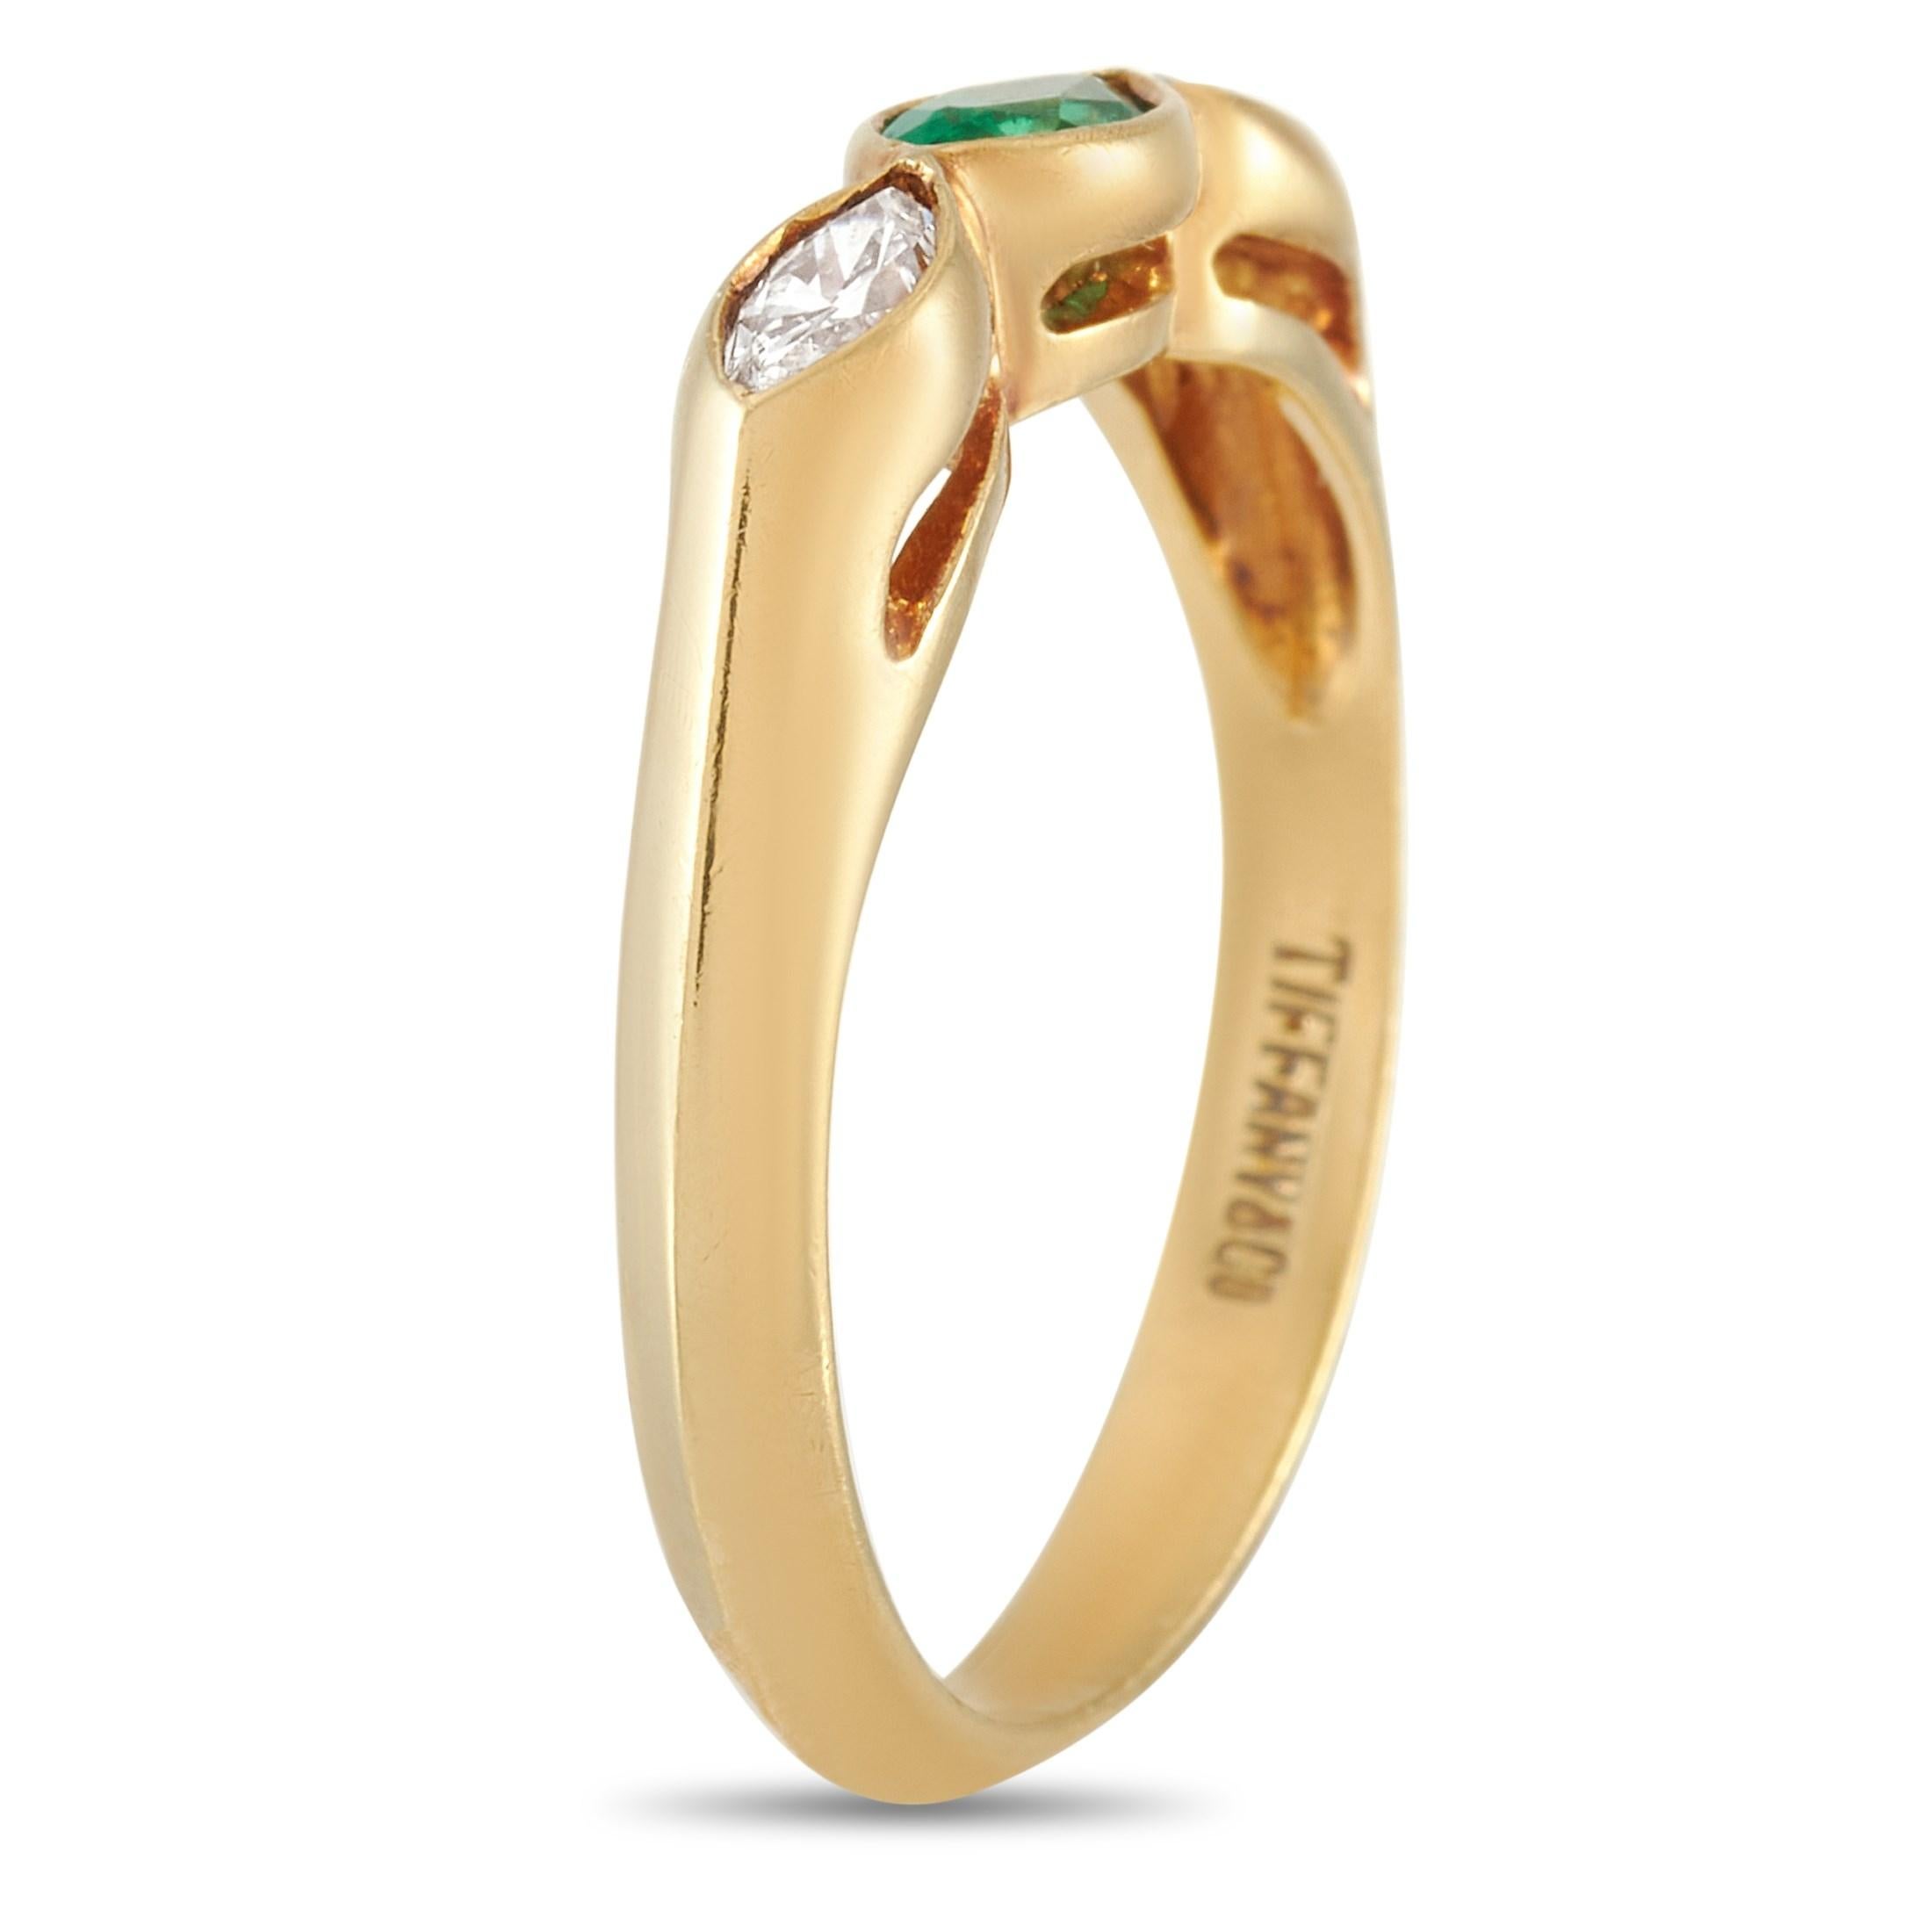 This Tiffany & Co. 18K Yellow Gold 0.25 ct Diamond and 0.25 ct Emerald Ring is made with 18K yellow gold and set with two marquise cut diamonds totaling 0.25 carats on either side of a 0.25 carat marquise cut emerald. The ring has band thickness of